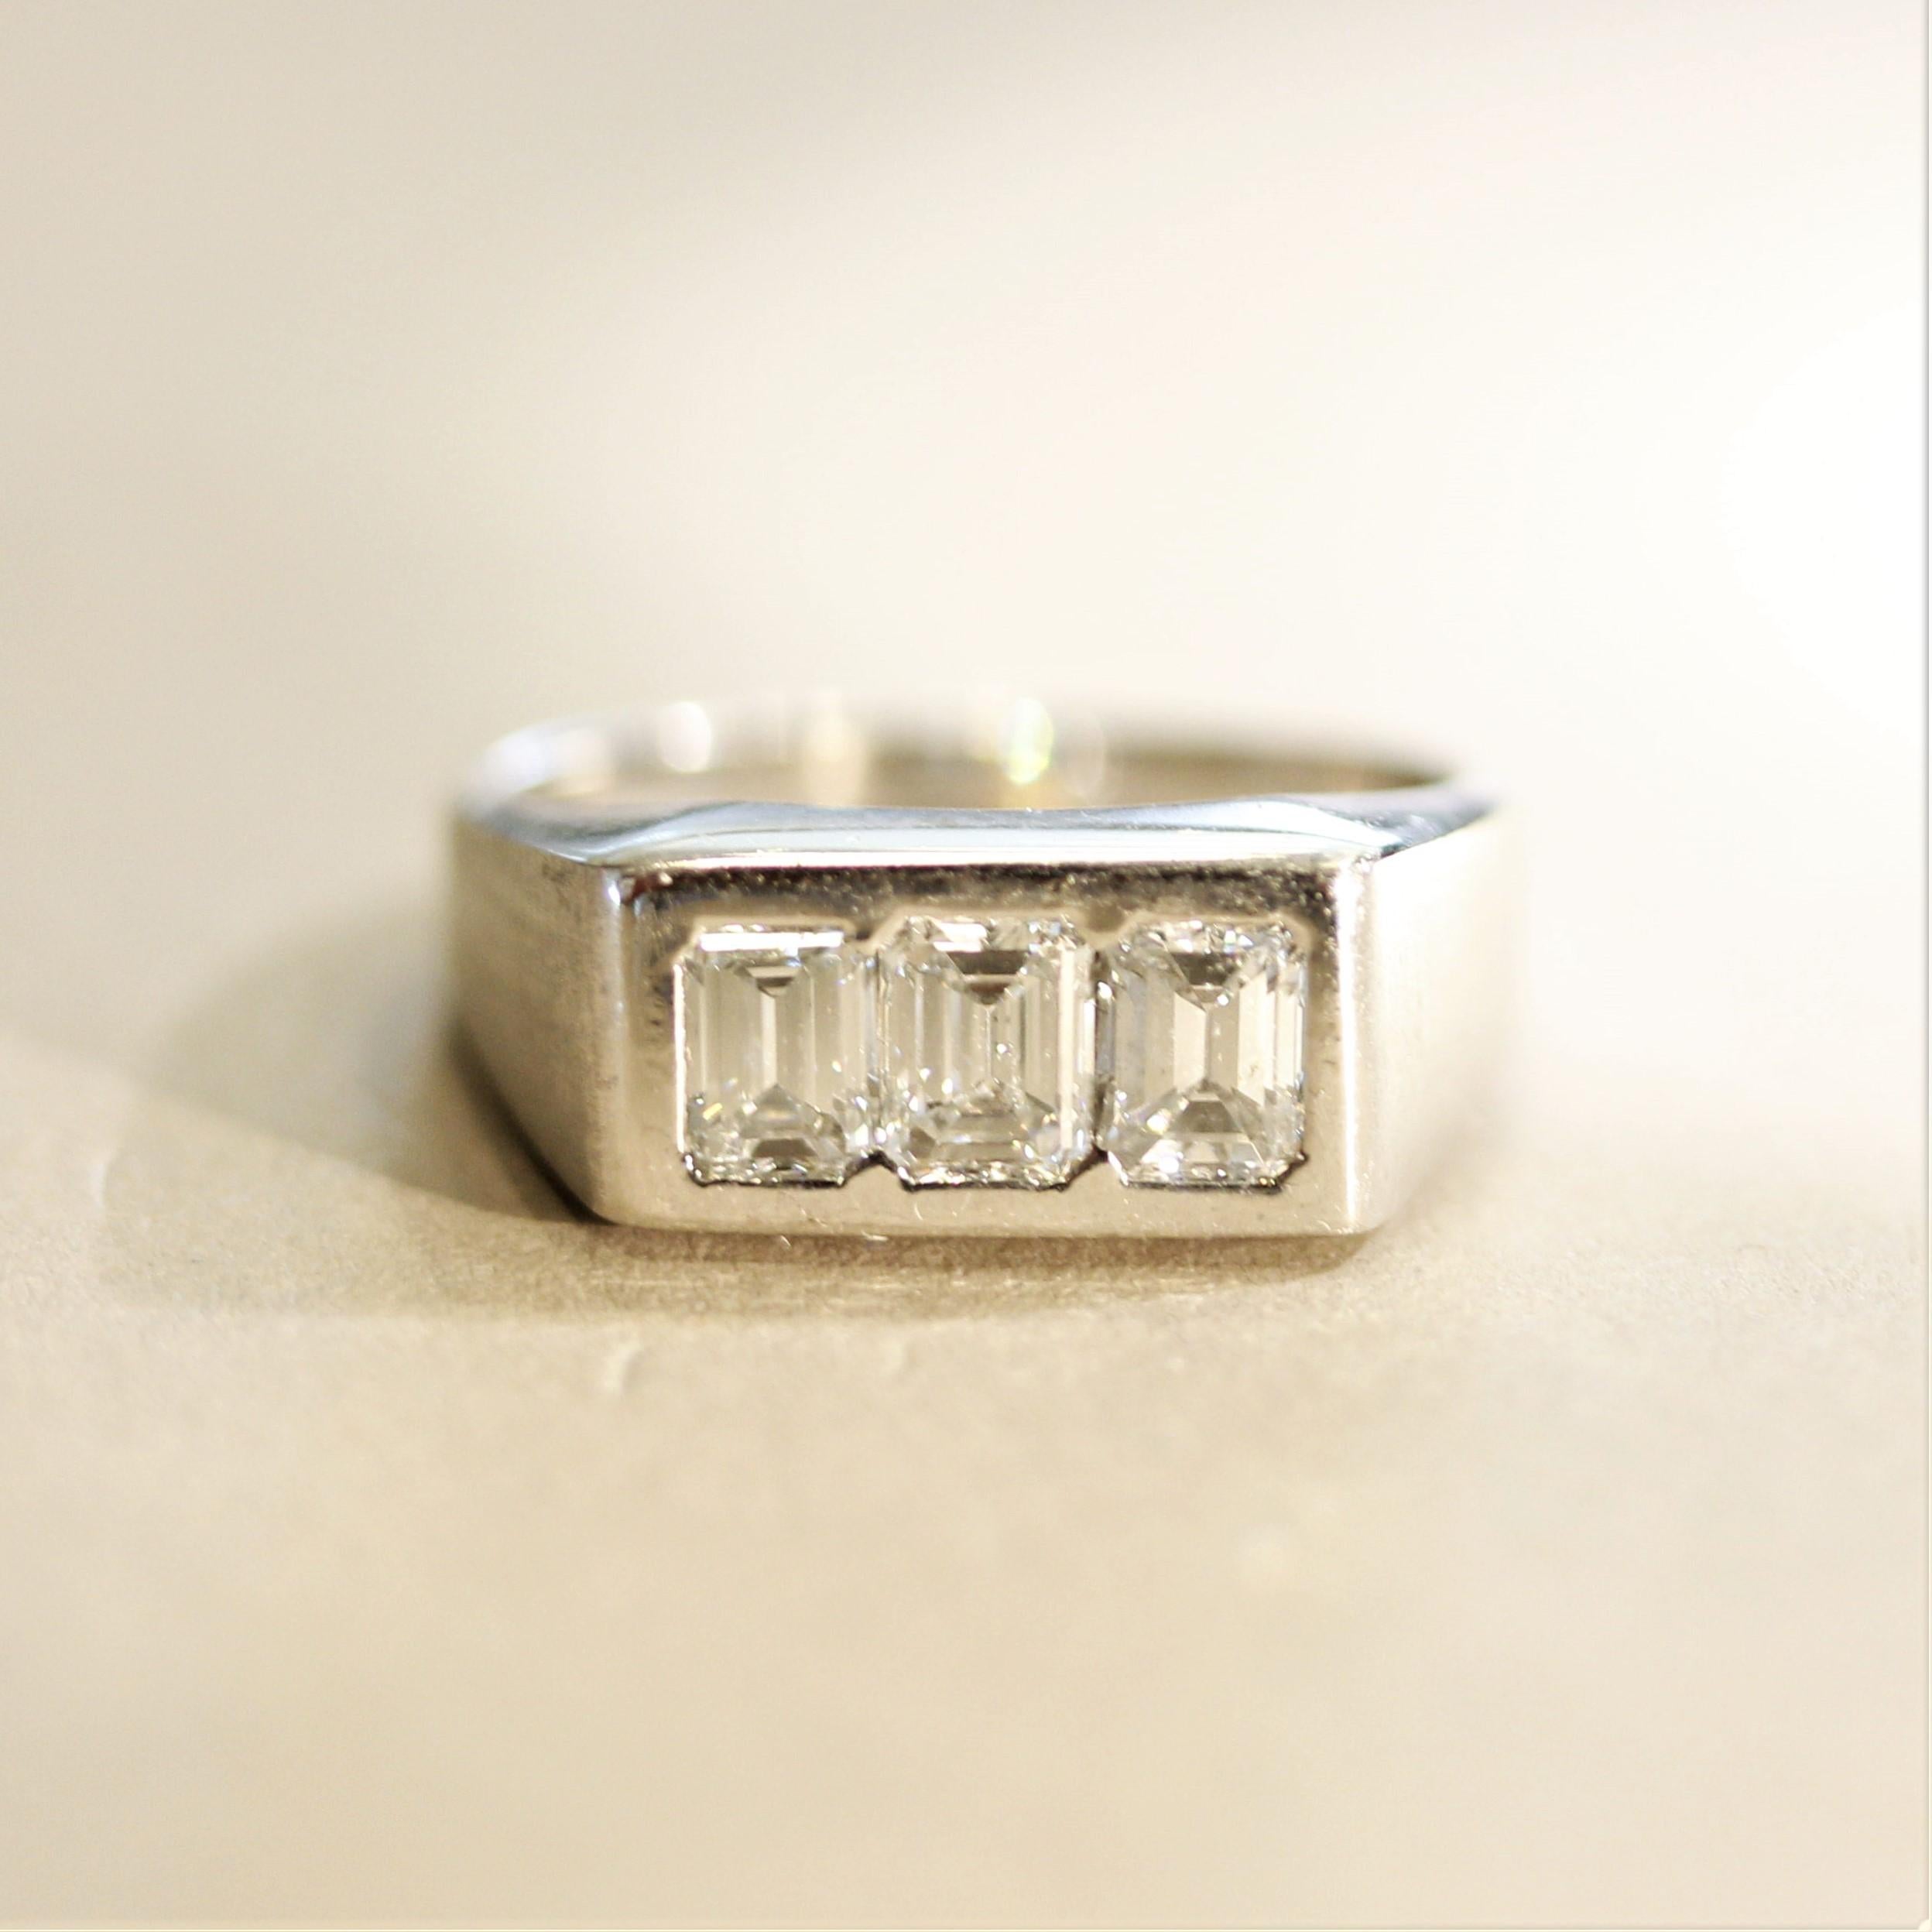 Simple yet fine and stylish! This gold ring features 3 fine emerald-cut diamonds weighing a total of 1.50 carats, about half-a-carat each diamond! Set side by side and flush with the top of the piece, this ring can be worn every day without the